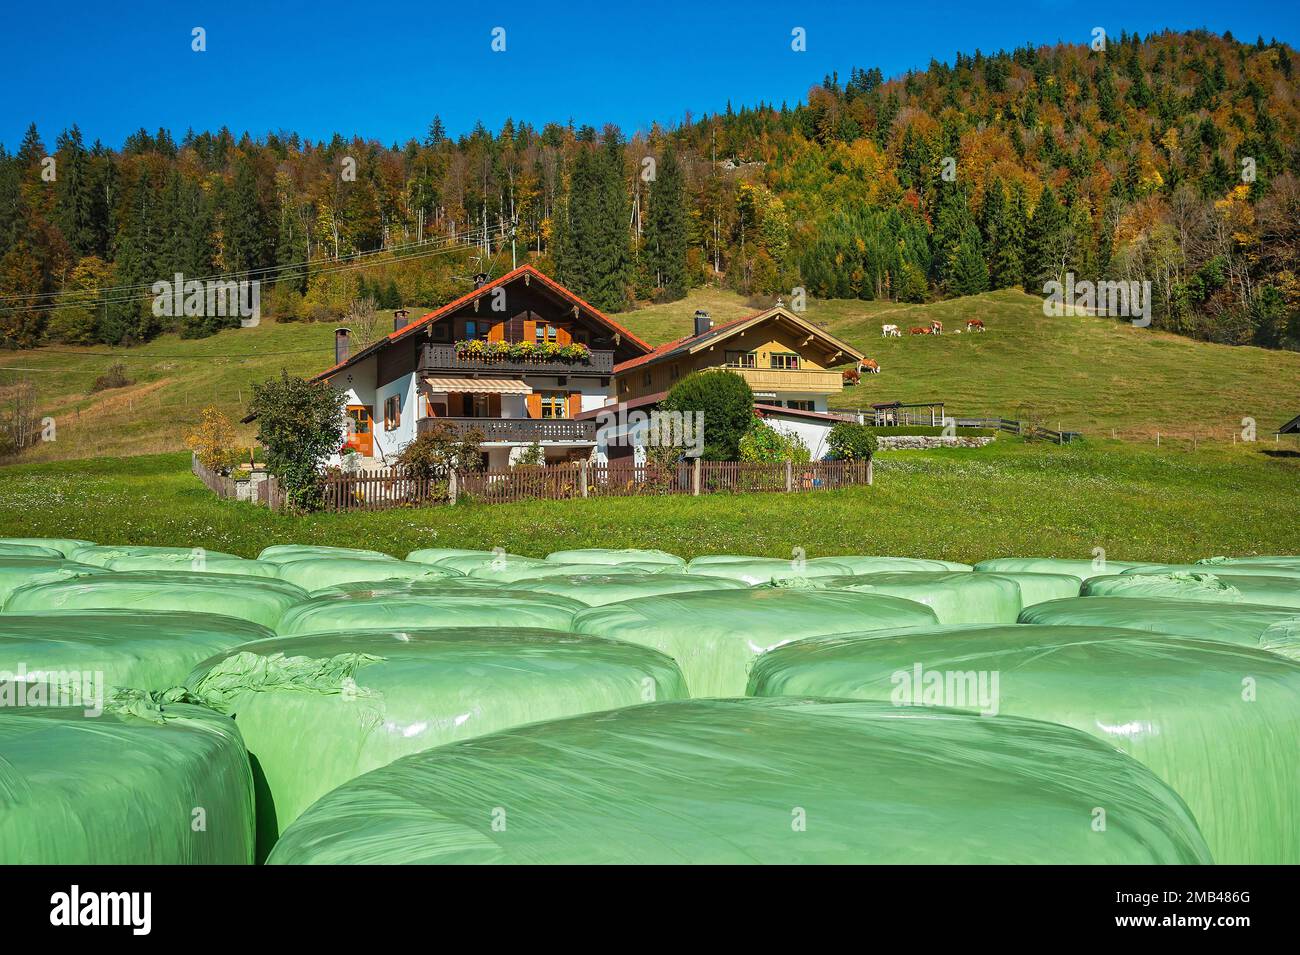 Green hay silo bales and cottages, autumn mixed forest, Jachenau, Bavaria, Germany Stock Photo